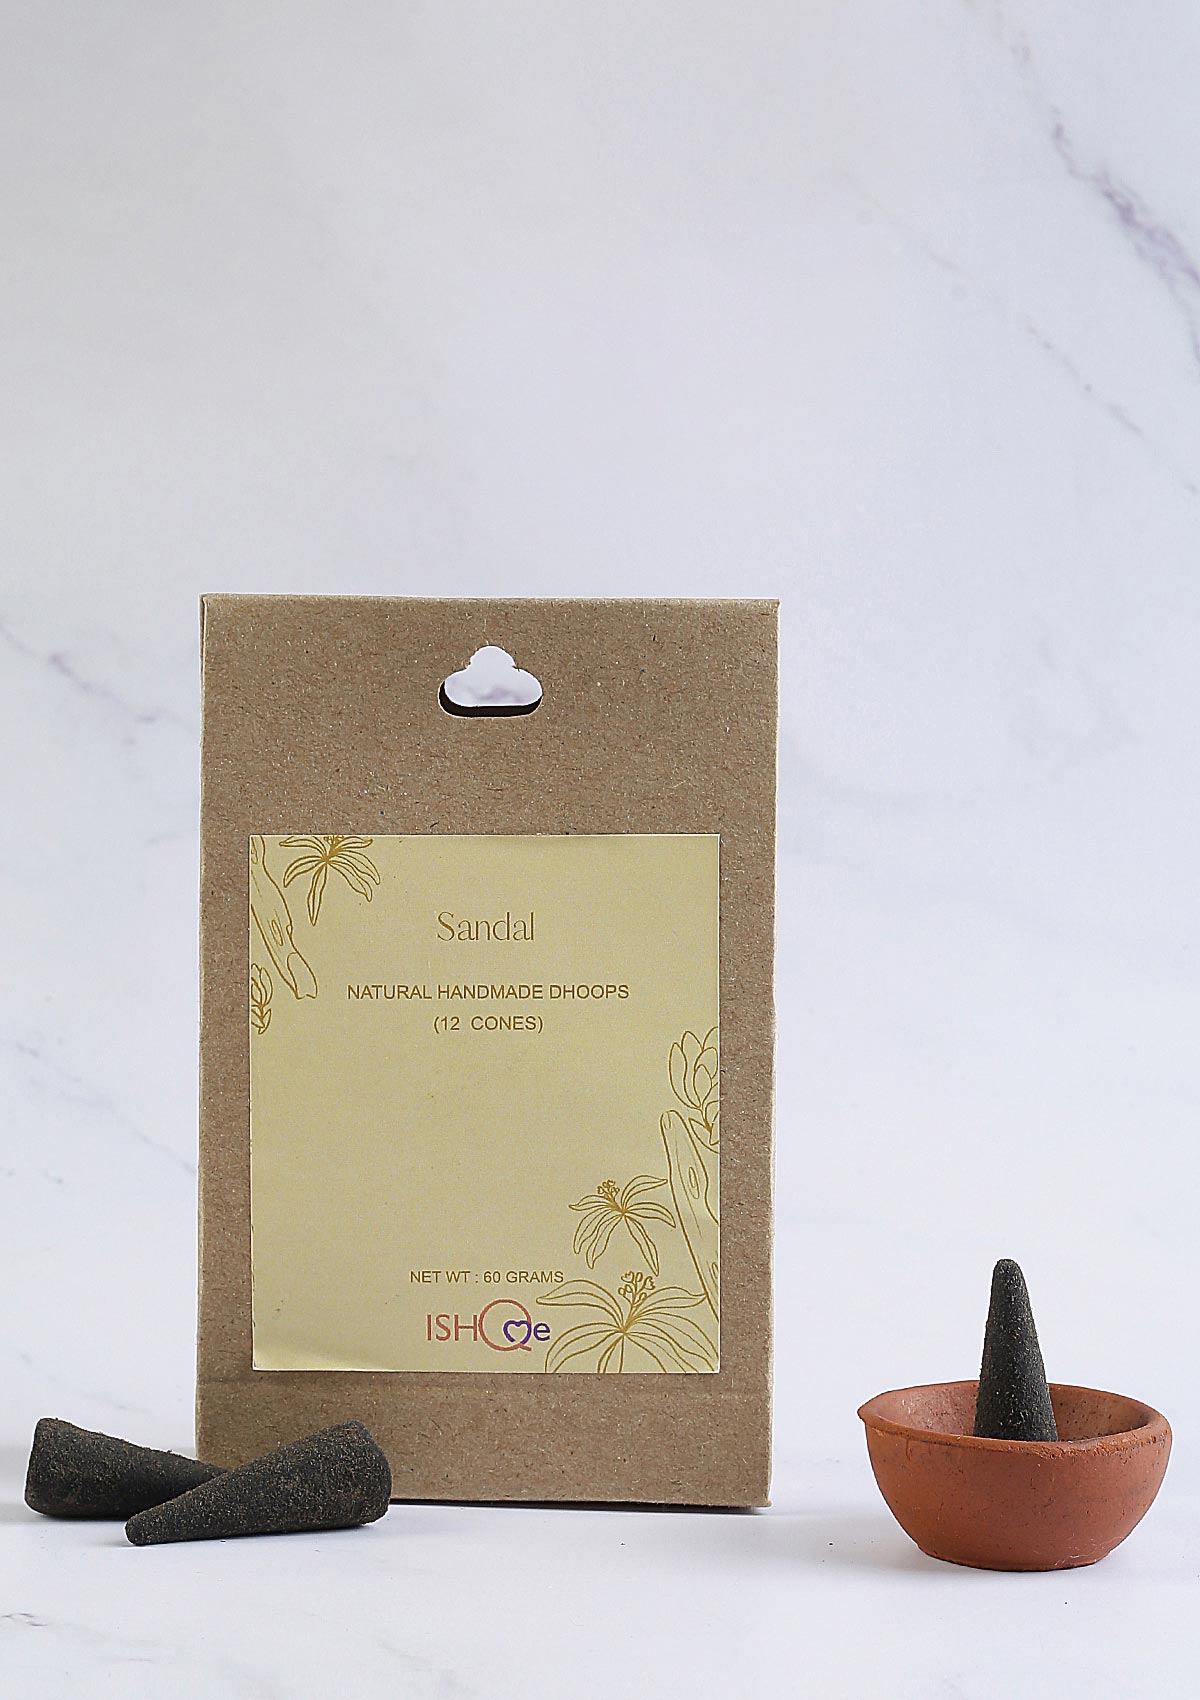 Scented Harmony: IshqMe's Sandal & Musk Dhoop Cones with Artistic Deep Turquoise sea Stand